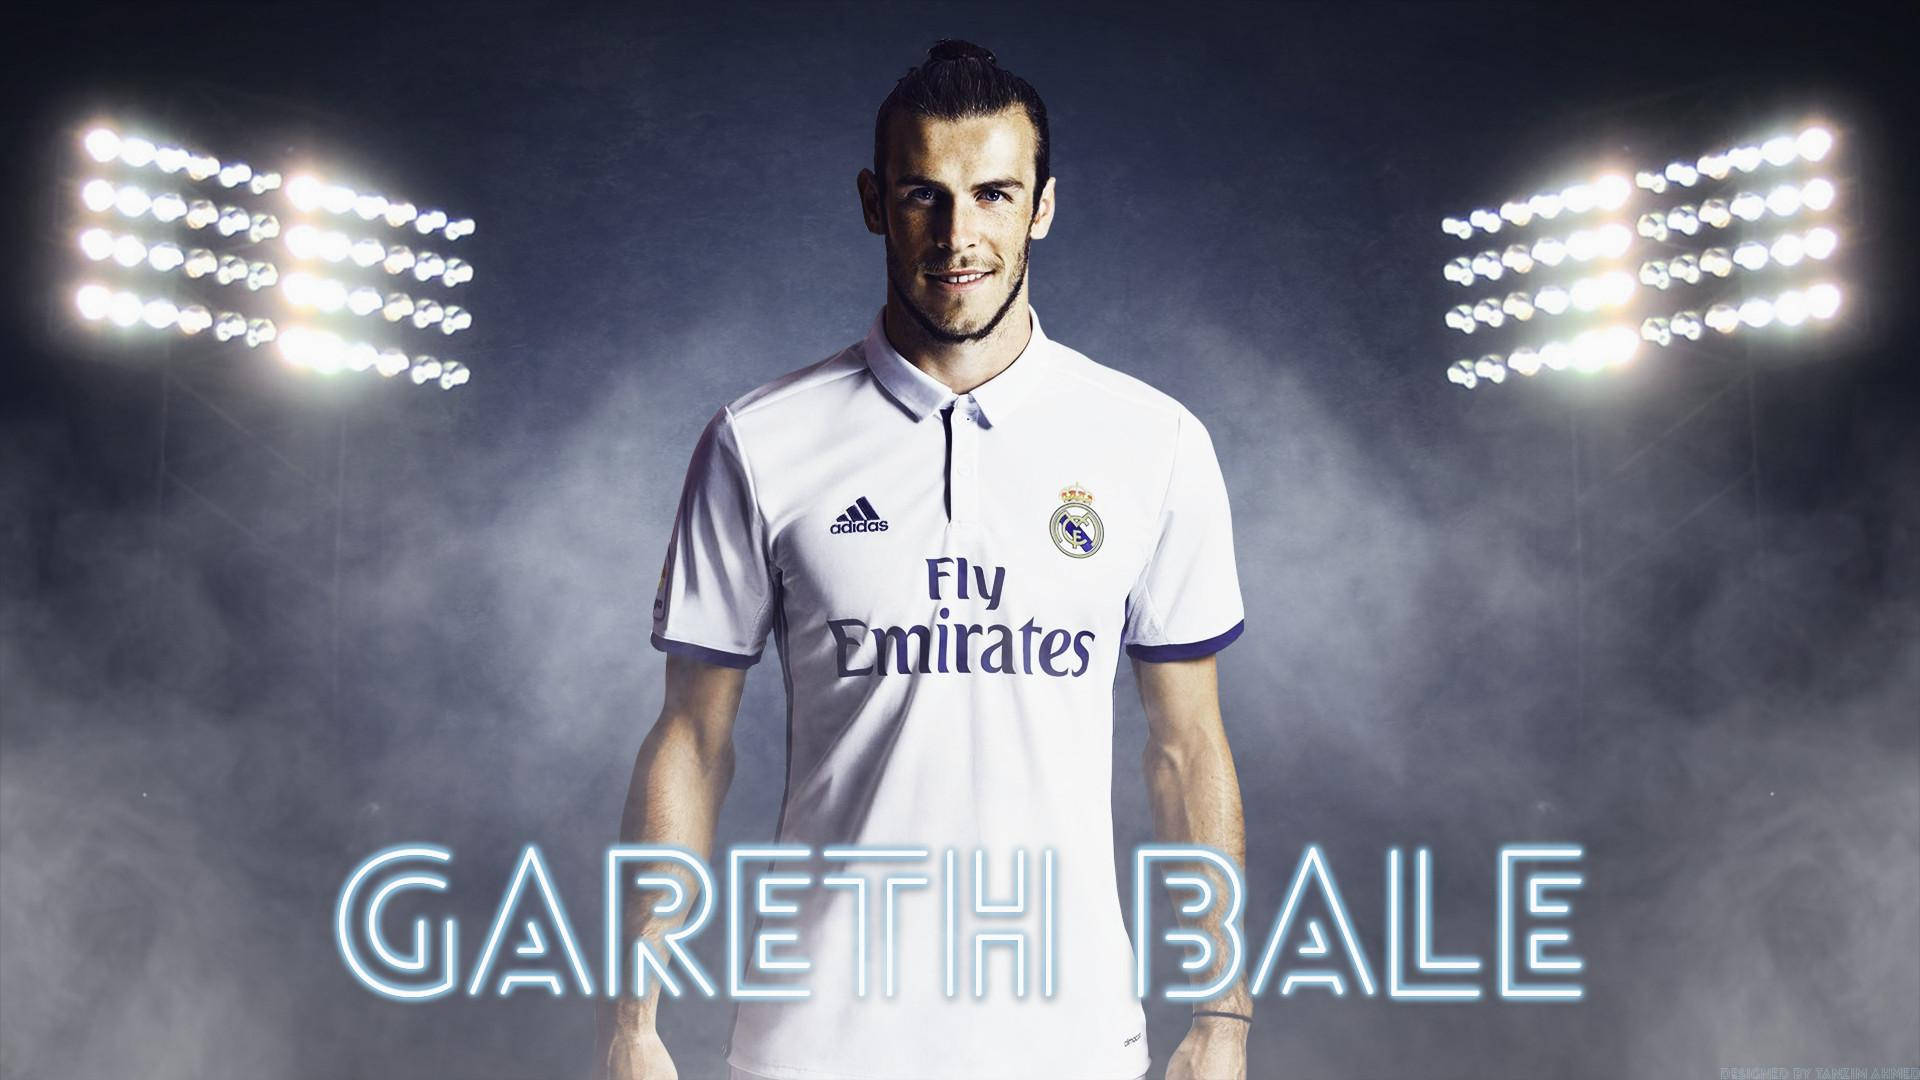 Gareth Bale Fly Emirates Cover Background